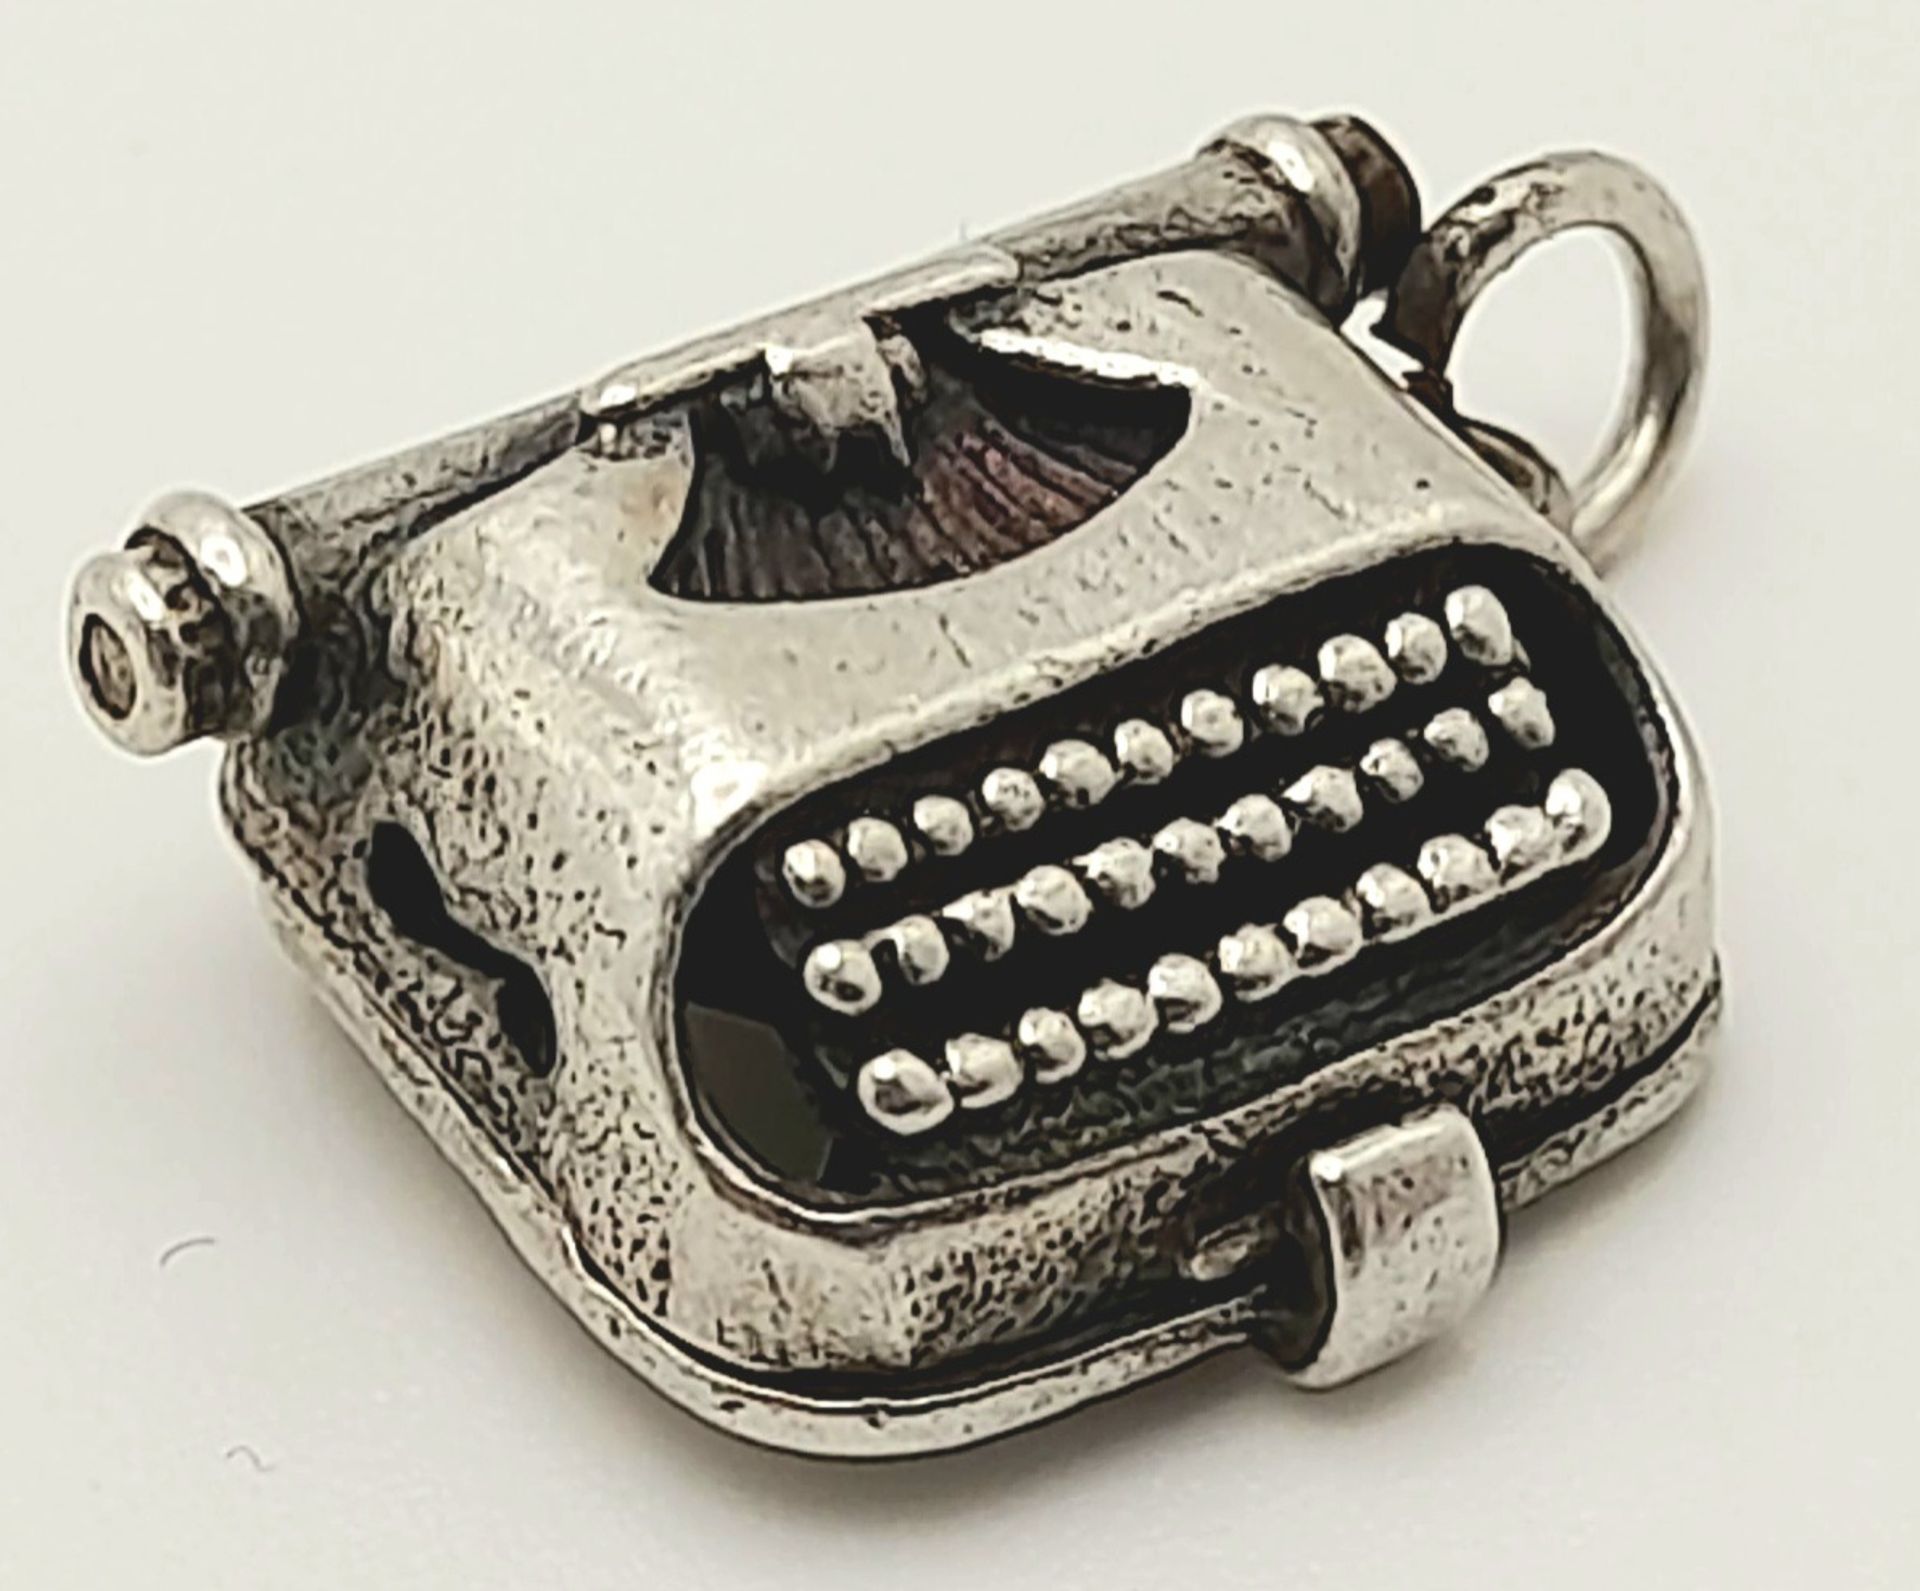 A STERLING SILVER TYPEWRITER CHARM. 1.9cm length, 3g weight. Ref: SC 8114